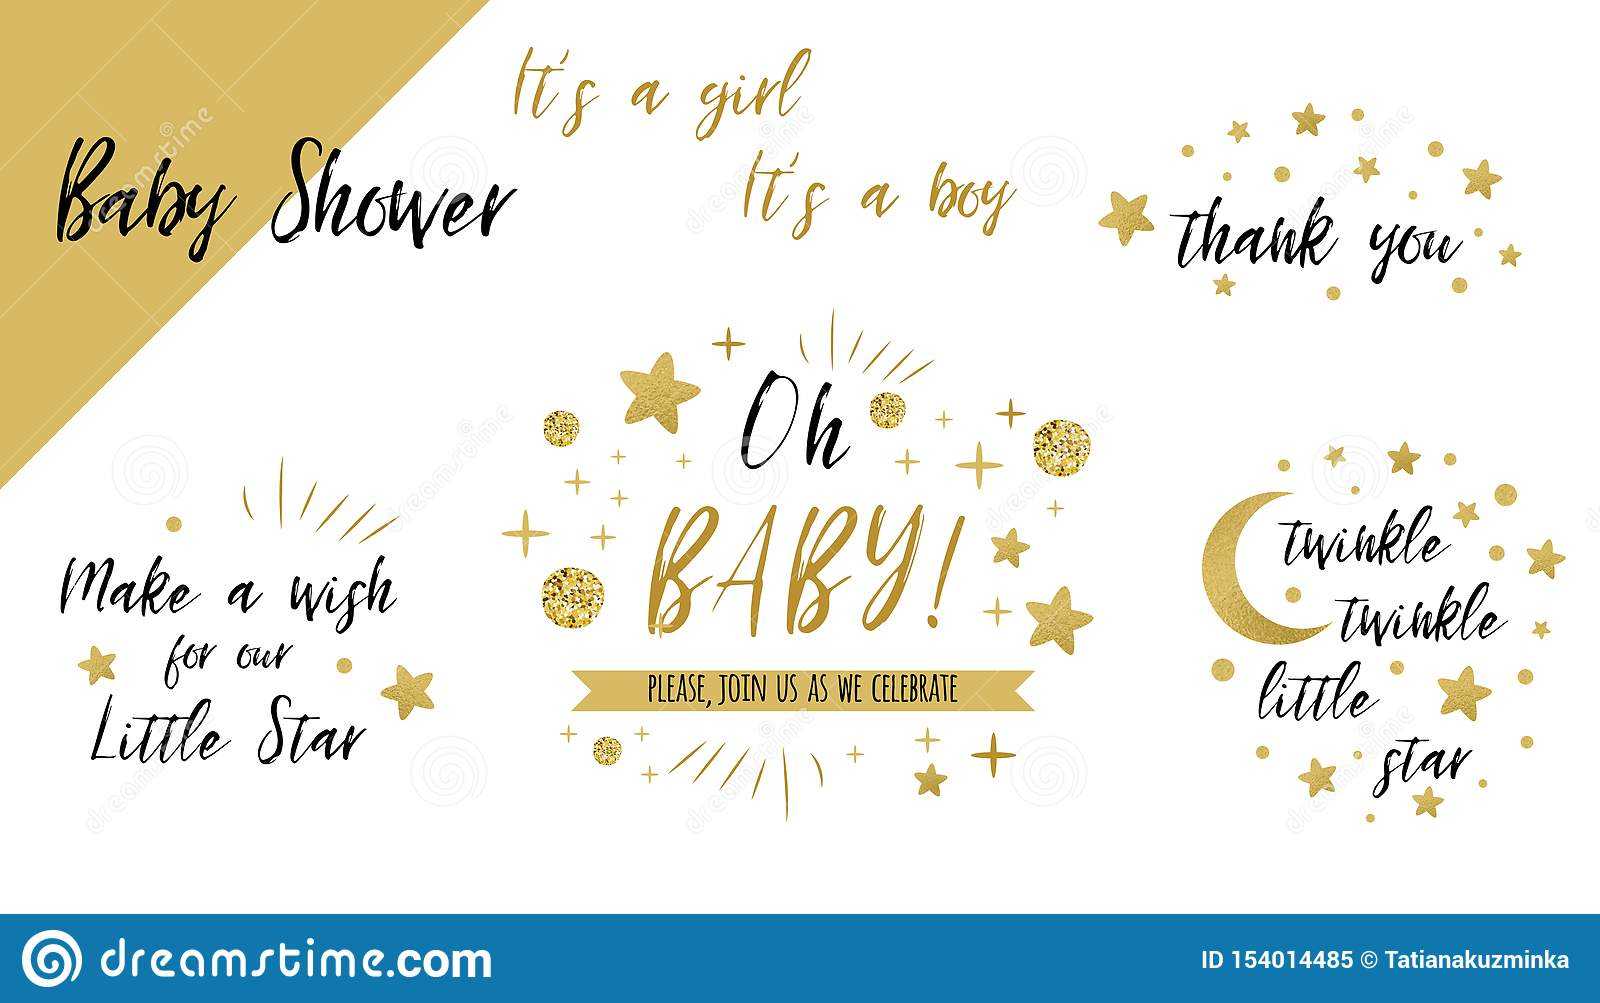 Baby Shower Set Gold Templates Twinkle Twinkle Little Star With Thank You Card Template For Baby Shower